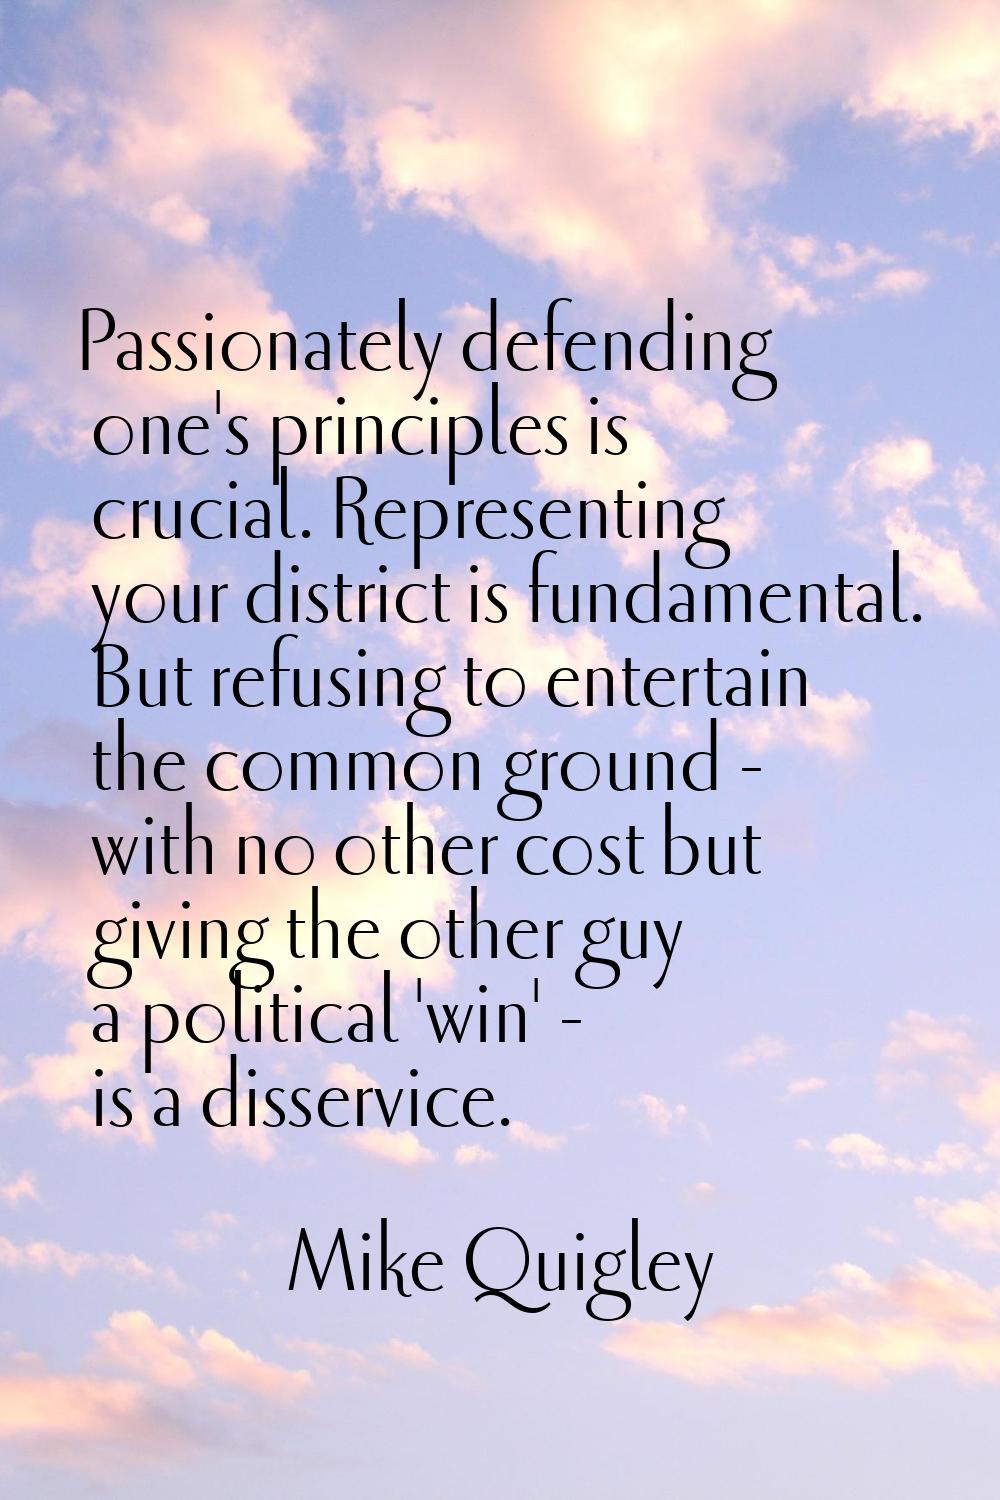 Passionately defending one's principles is crucial. Representing your district is fundamental. But 